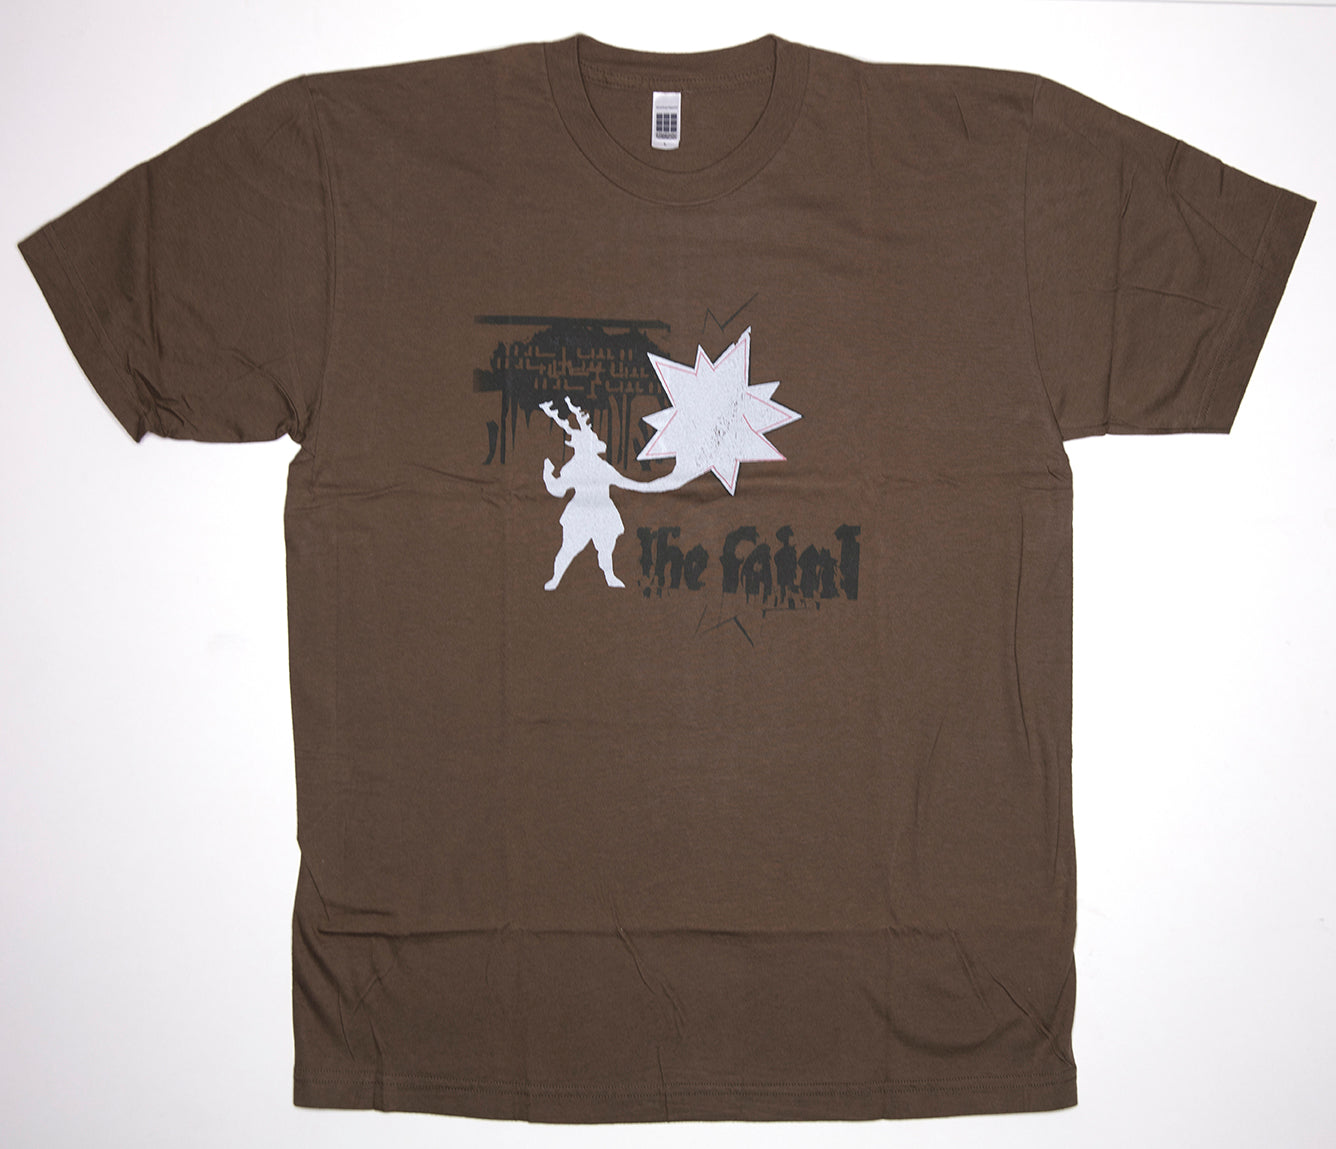 the Faint - Wet From Birth 2004 Tour Shirt Size Large